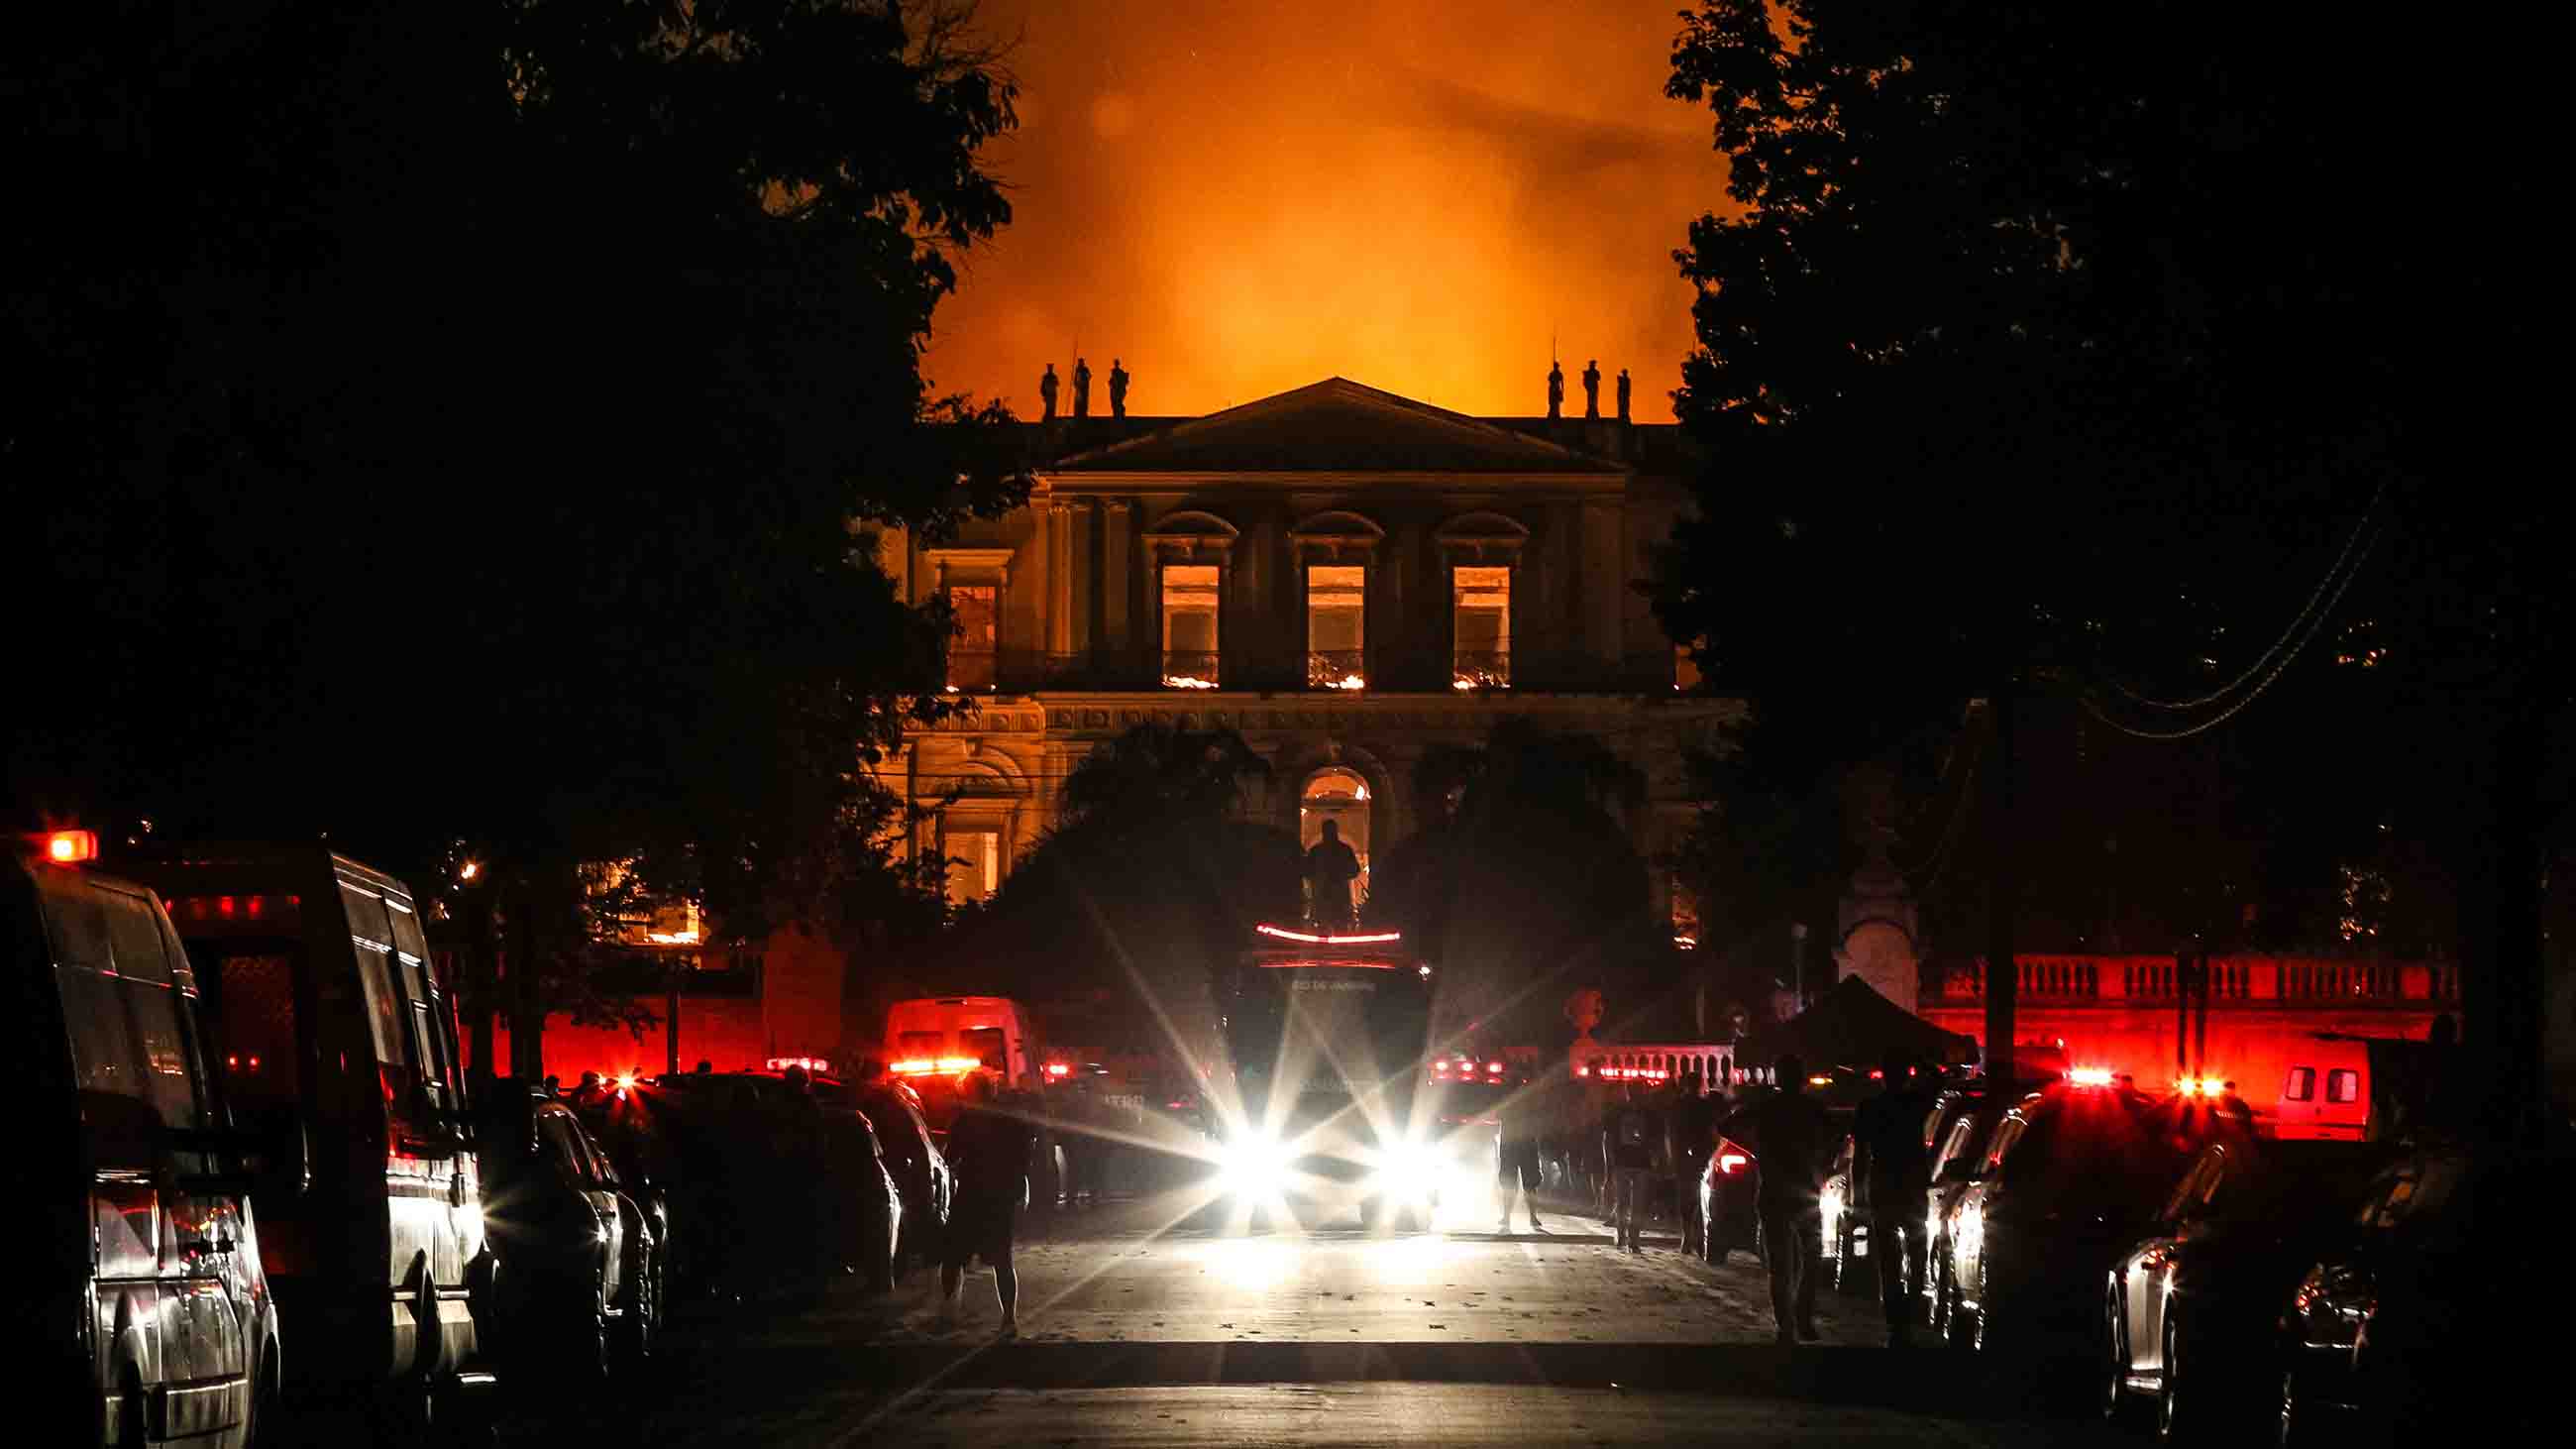 A fire ravaged the National Museum of Brazil in Rio de Janeiro on Sunday night.